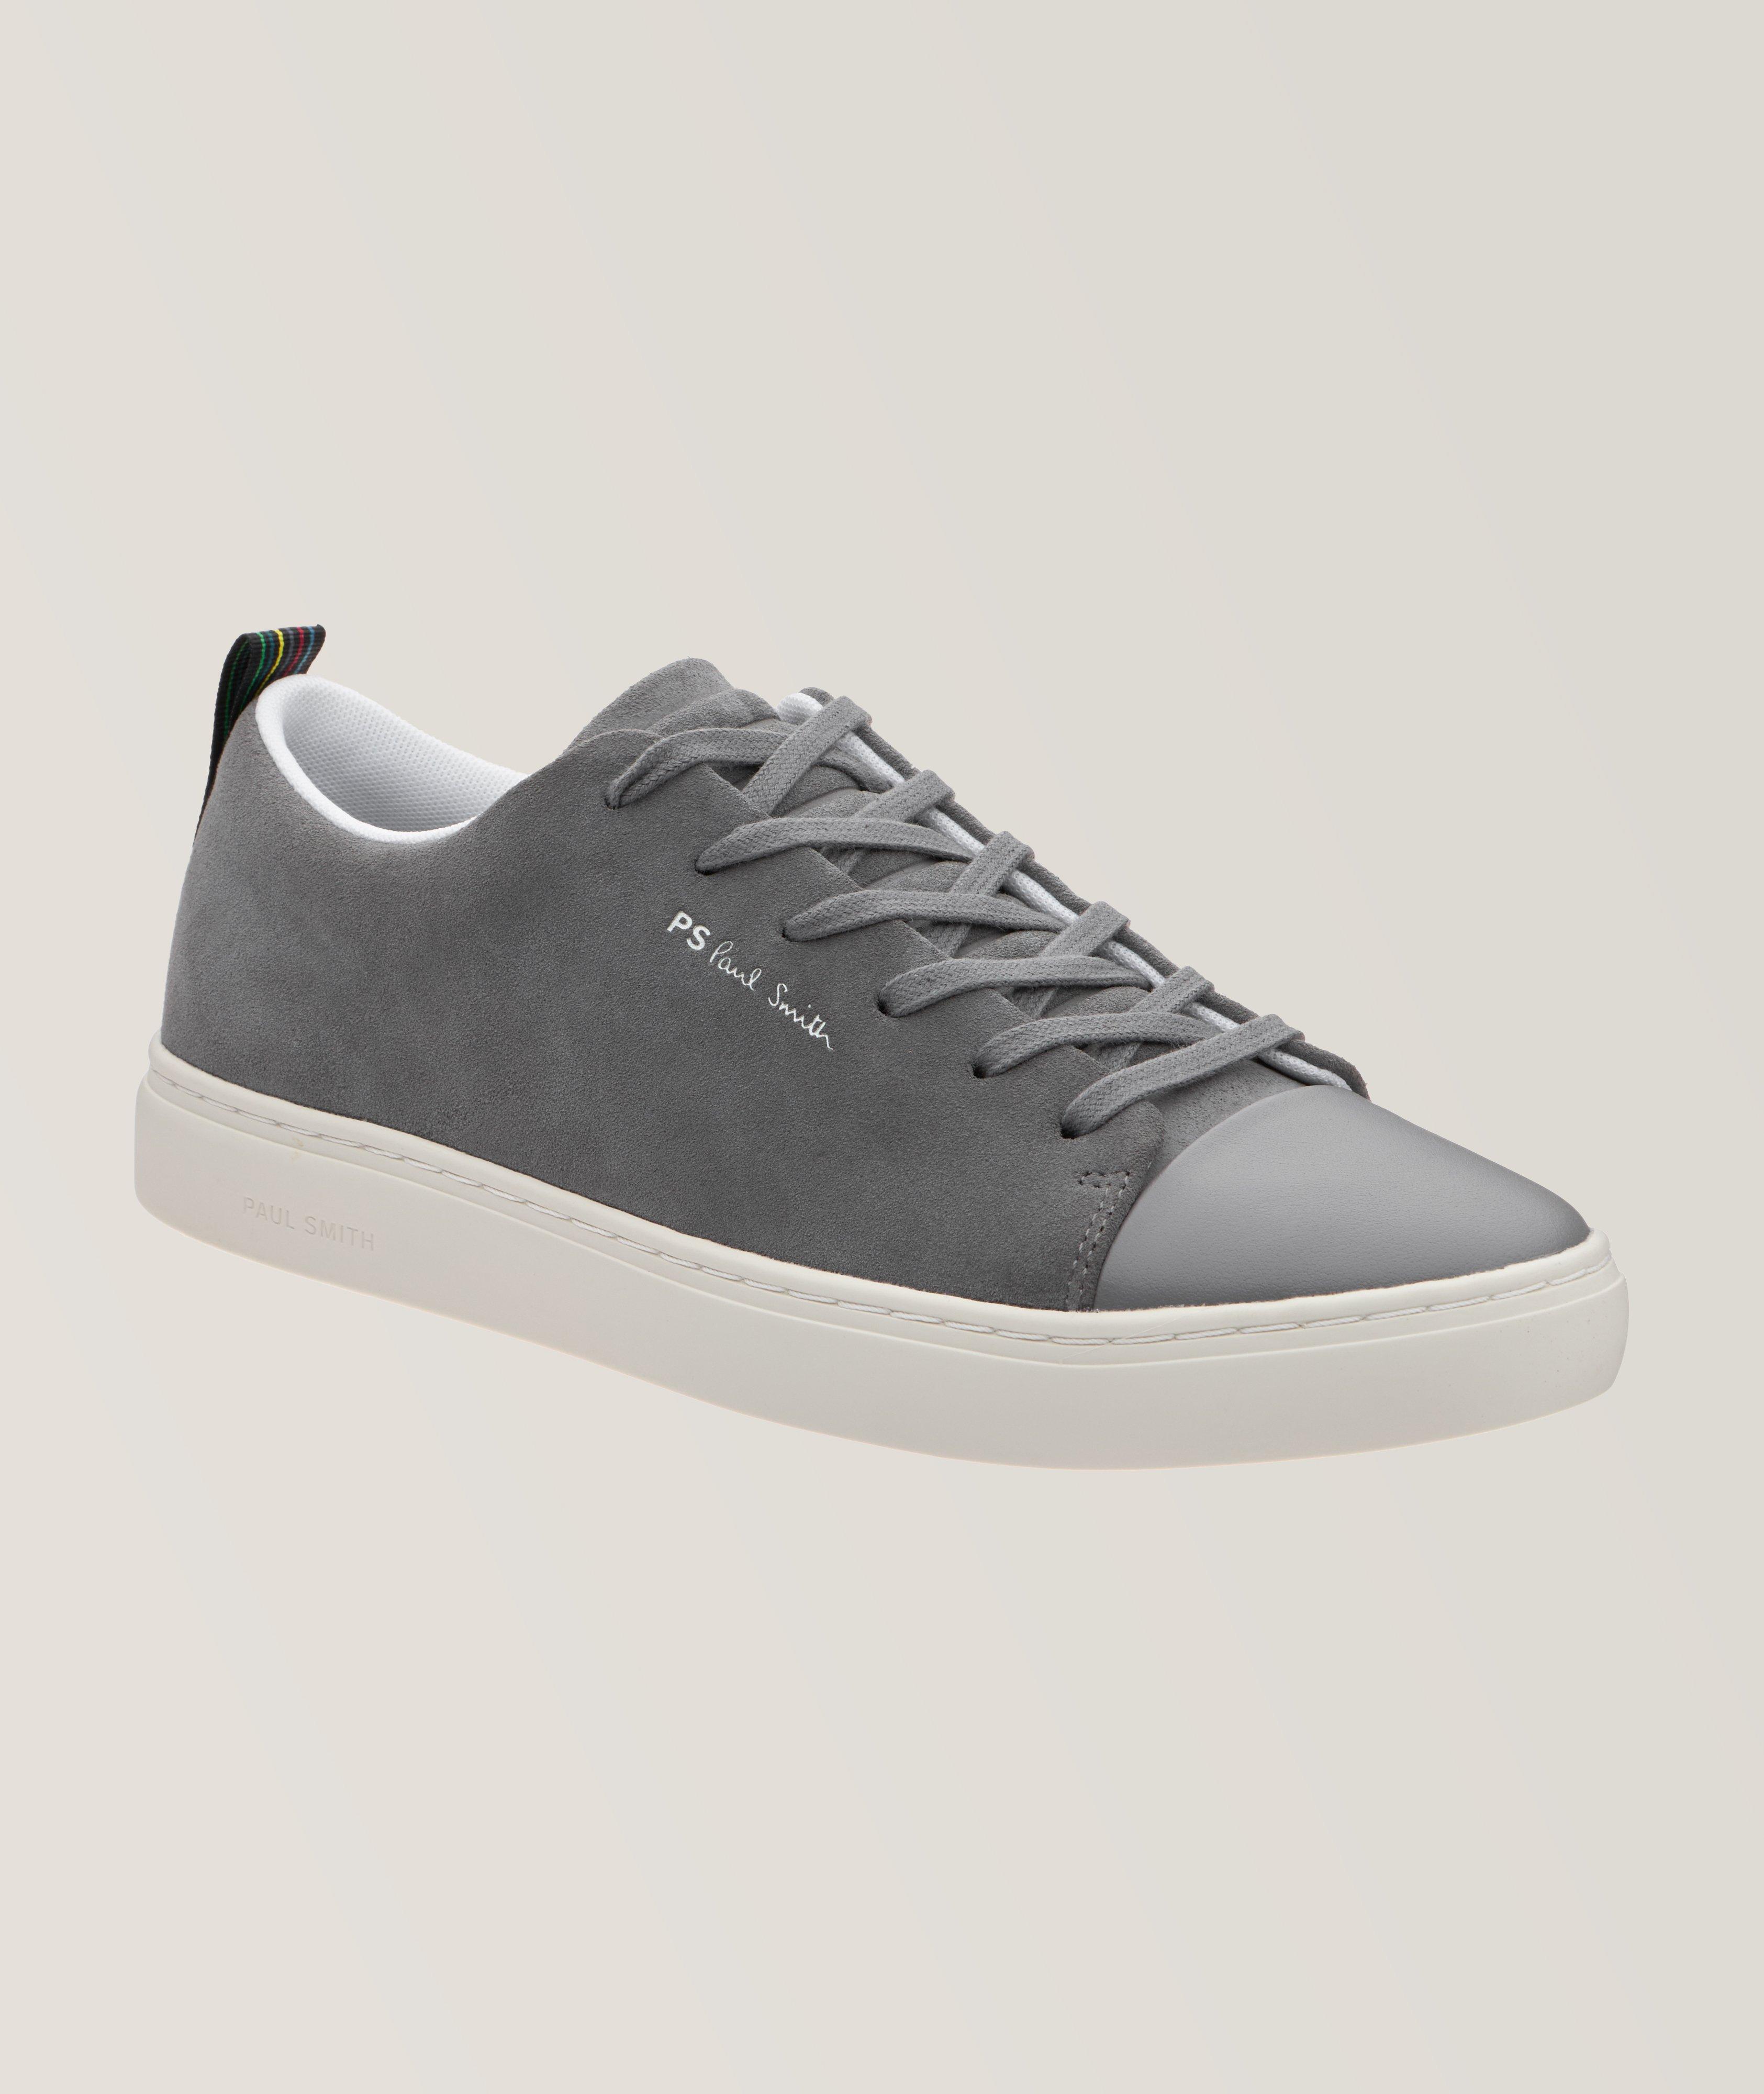 Lee Leather Sneakers image 0